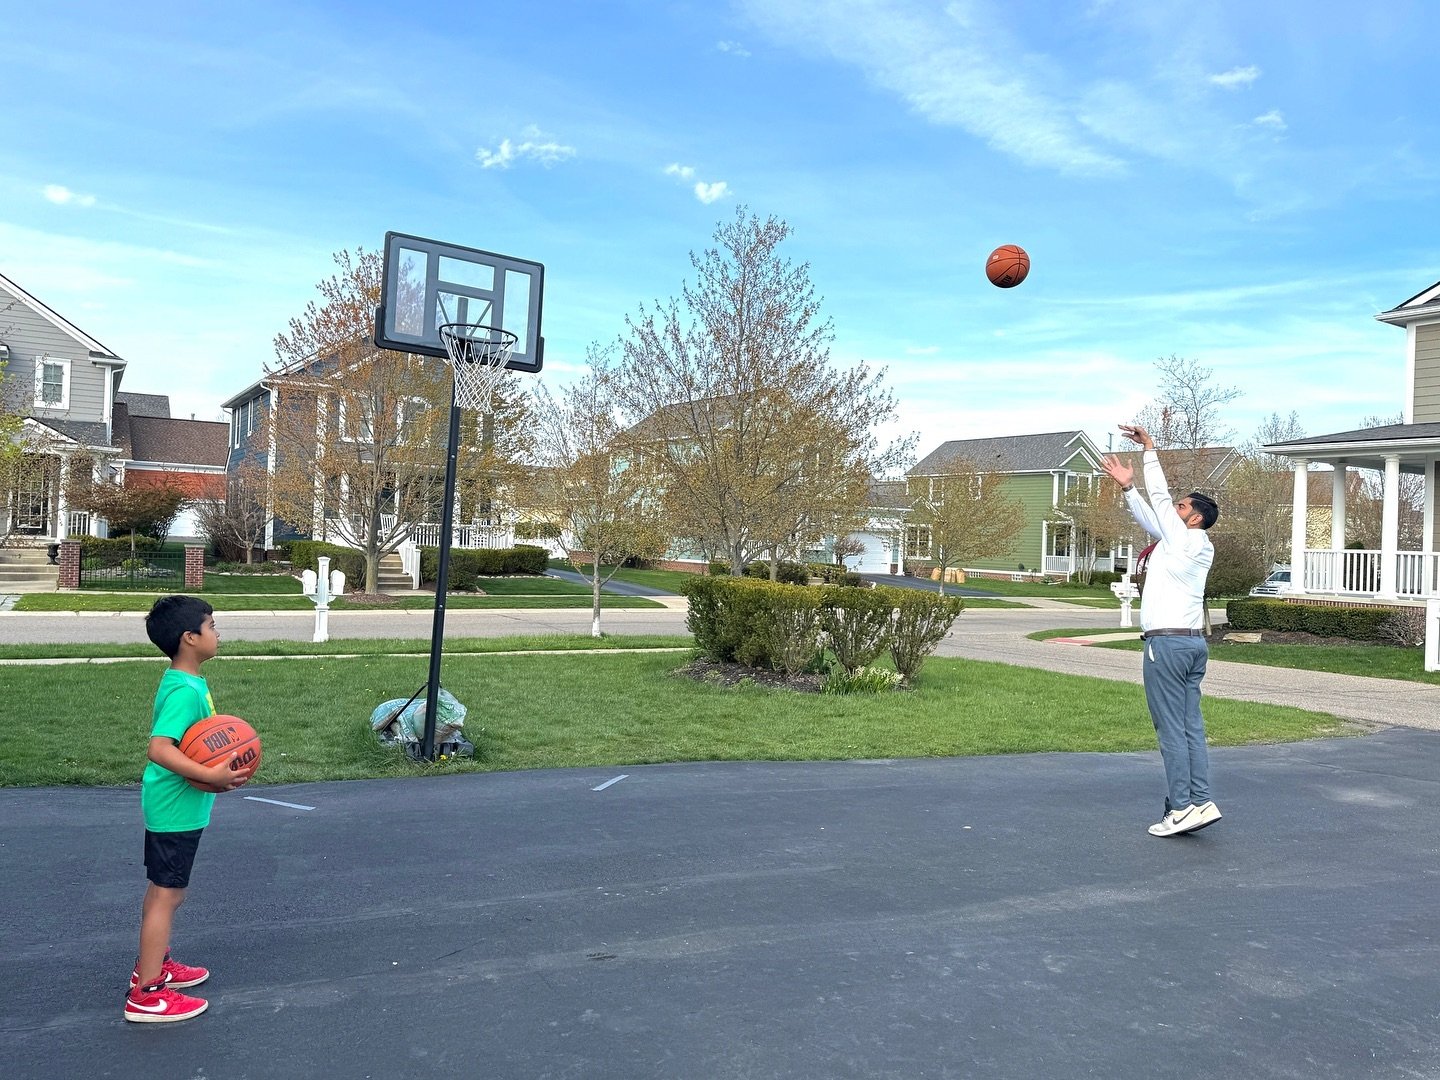 Beautiful evenings call for a pre-coffee hour game of PIG with my son! 🏀